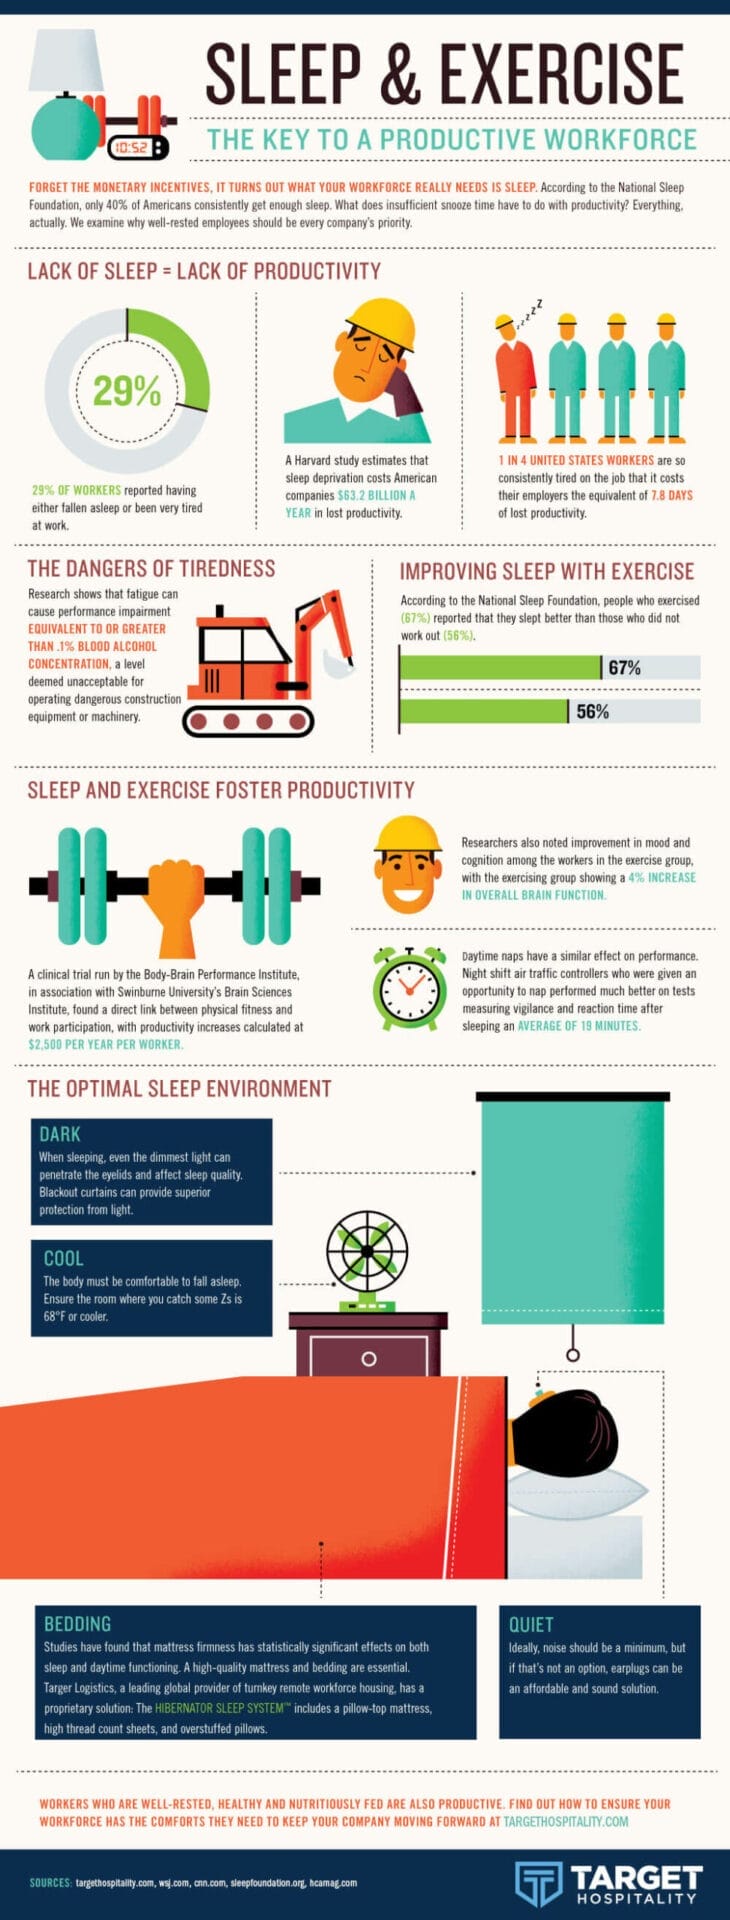 Infographic shows the relationship between sleep and exercise for a productive workforce.